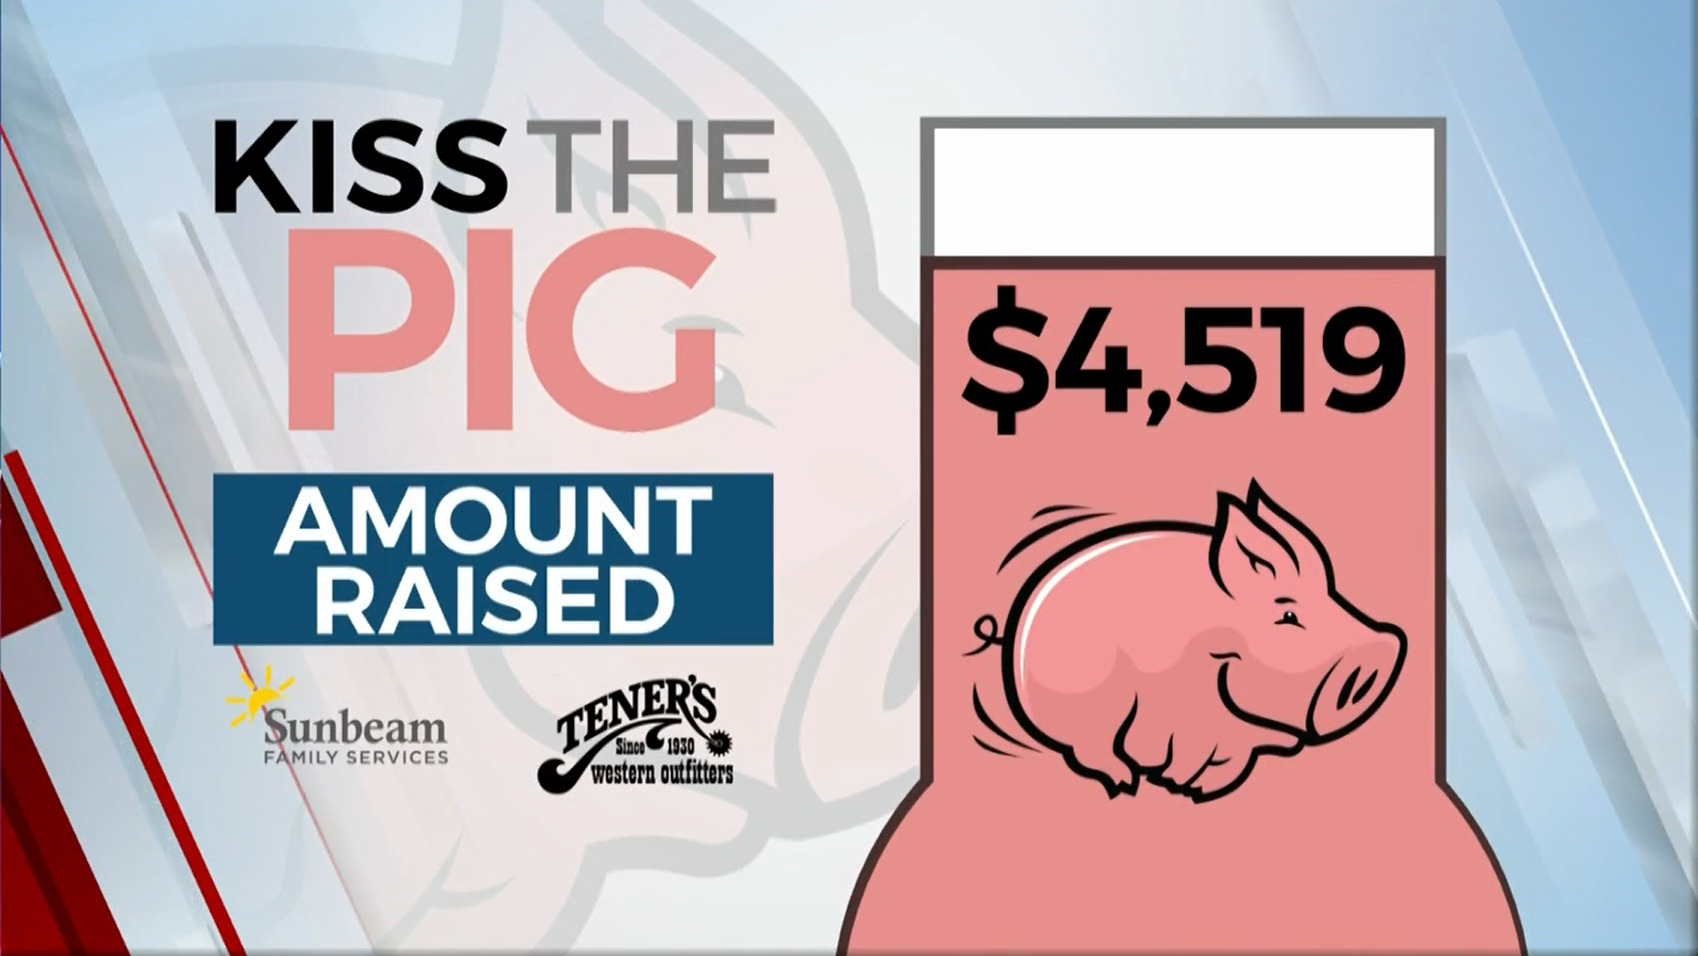 Kiss The Pig Standings As Of Sept. 22, 2022